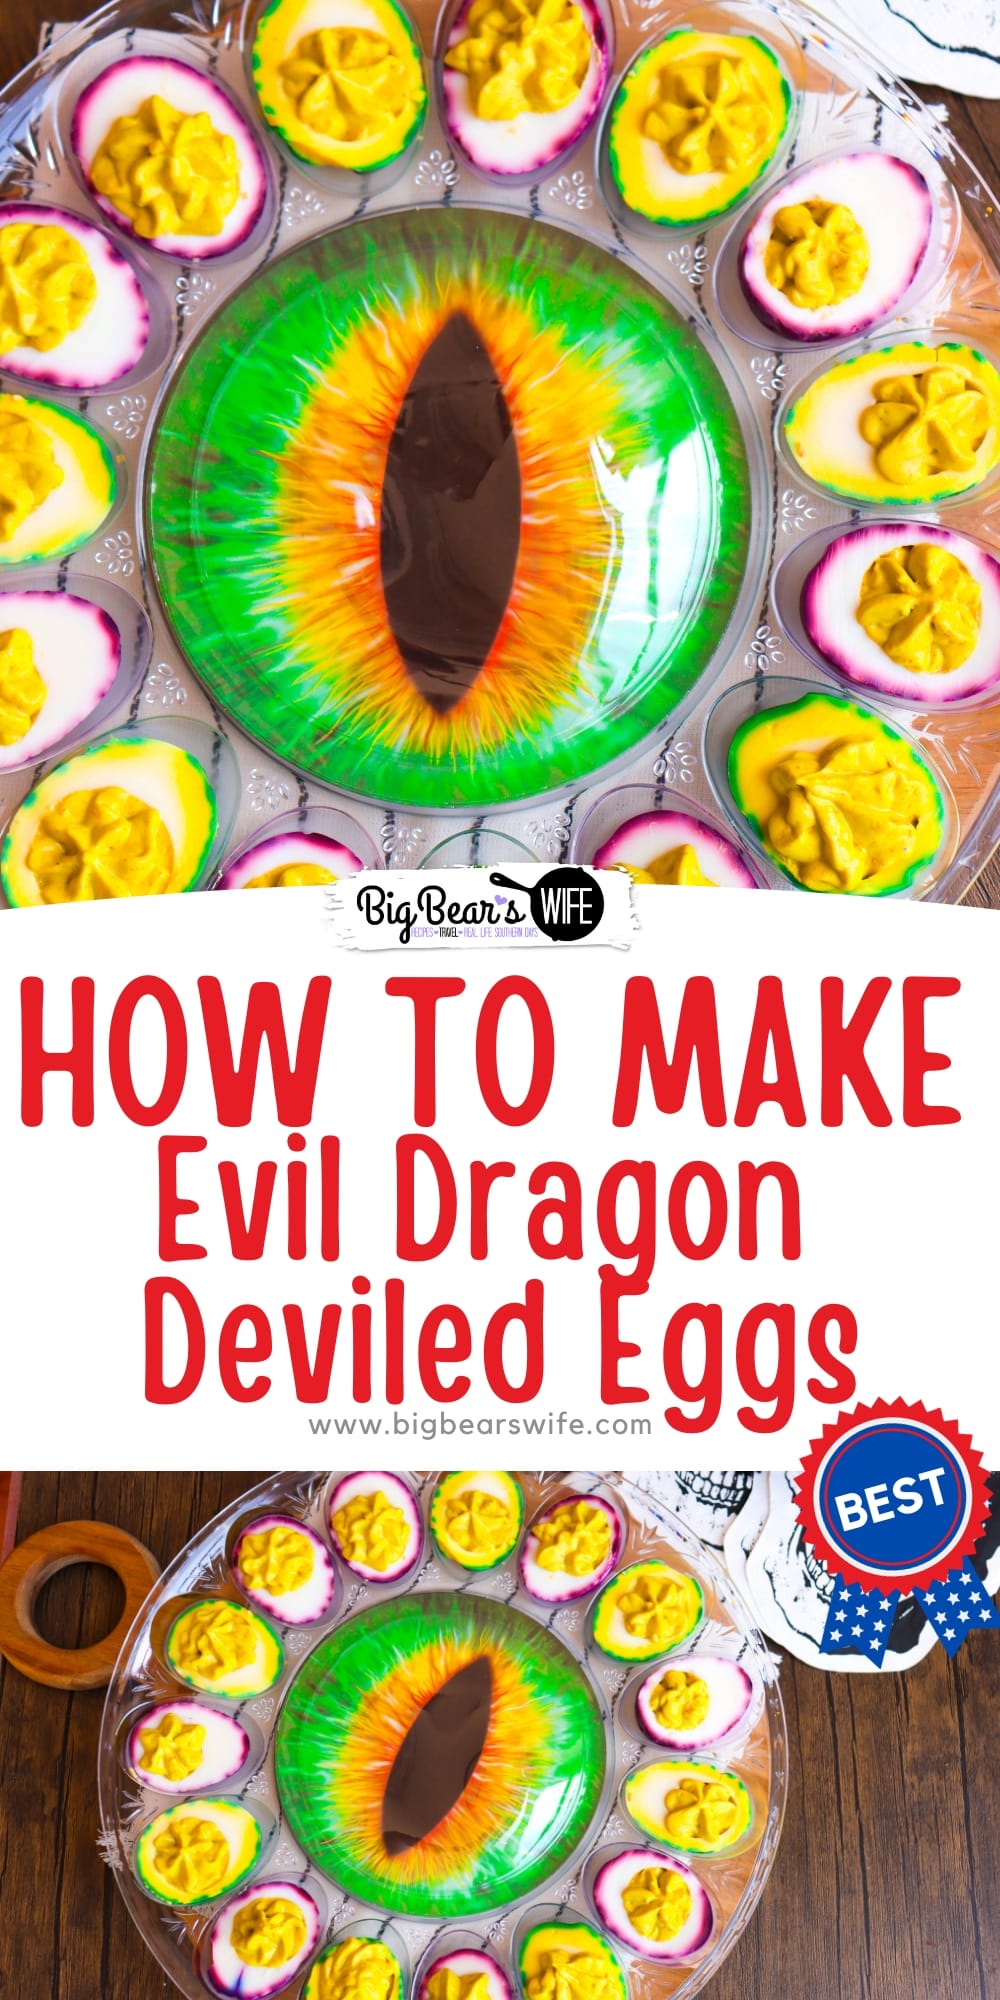 Let these Evil Dragon Deviled Eggs be the star of your Halloween party table this year! They're not only delicious but creepy looking too! Perfect for Halloween! via @bigbearswife